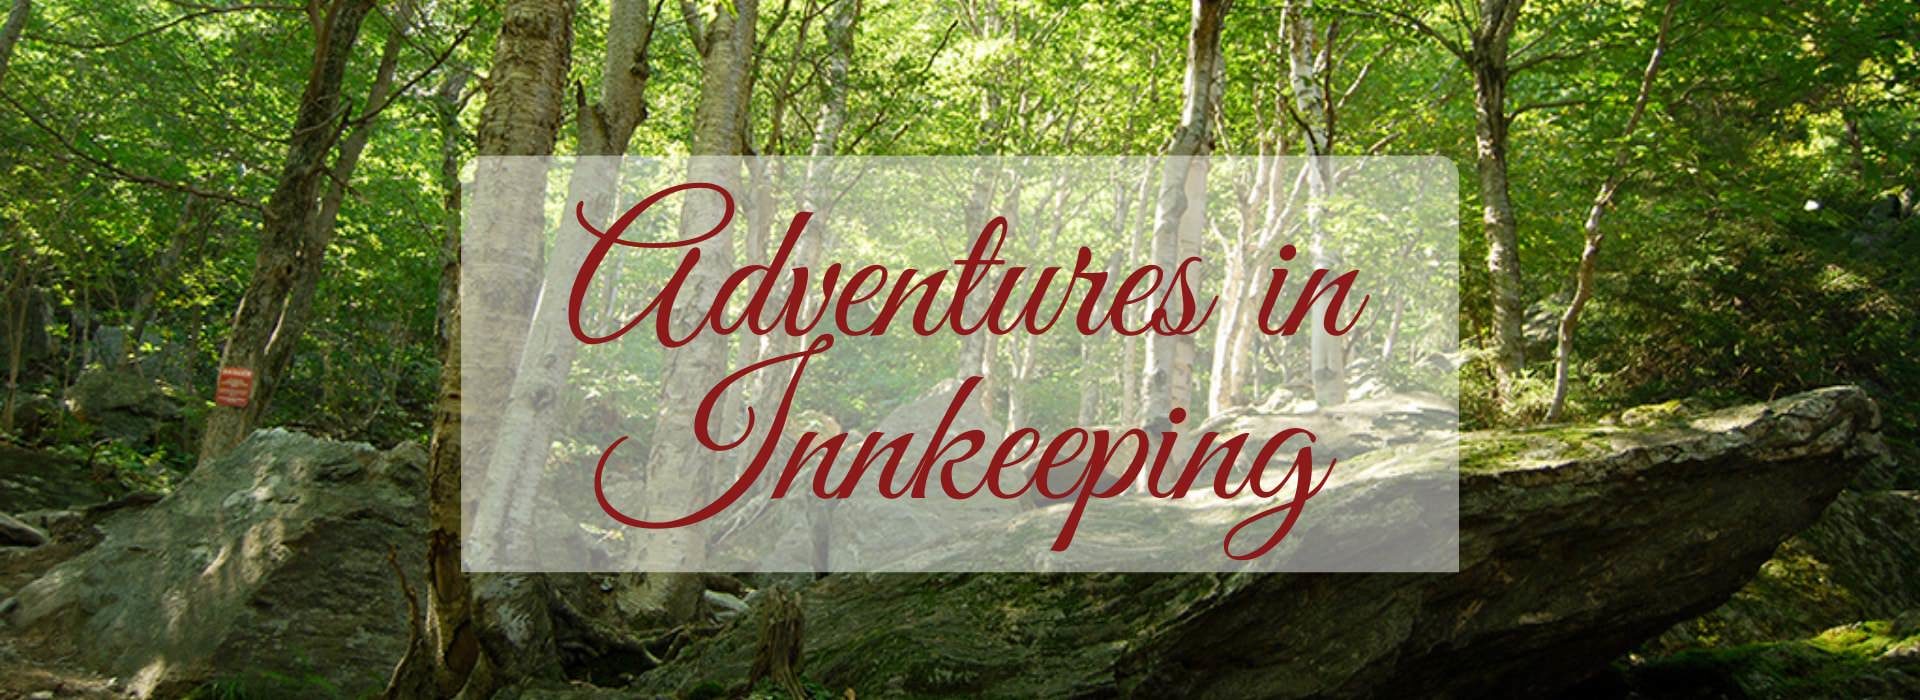 Red overlay text stating Adventures in Innkeeping with large green trees and rocks in the background